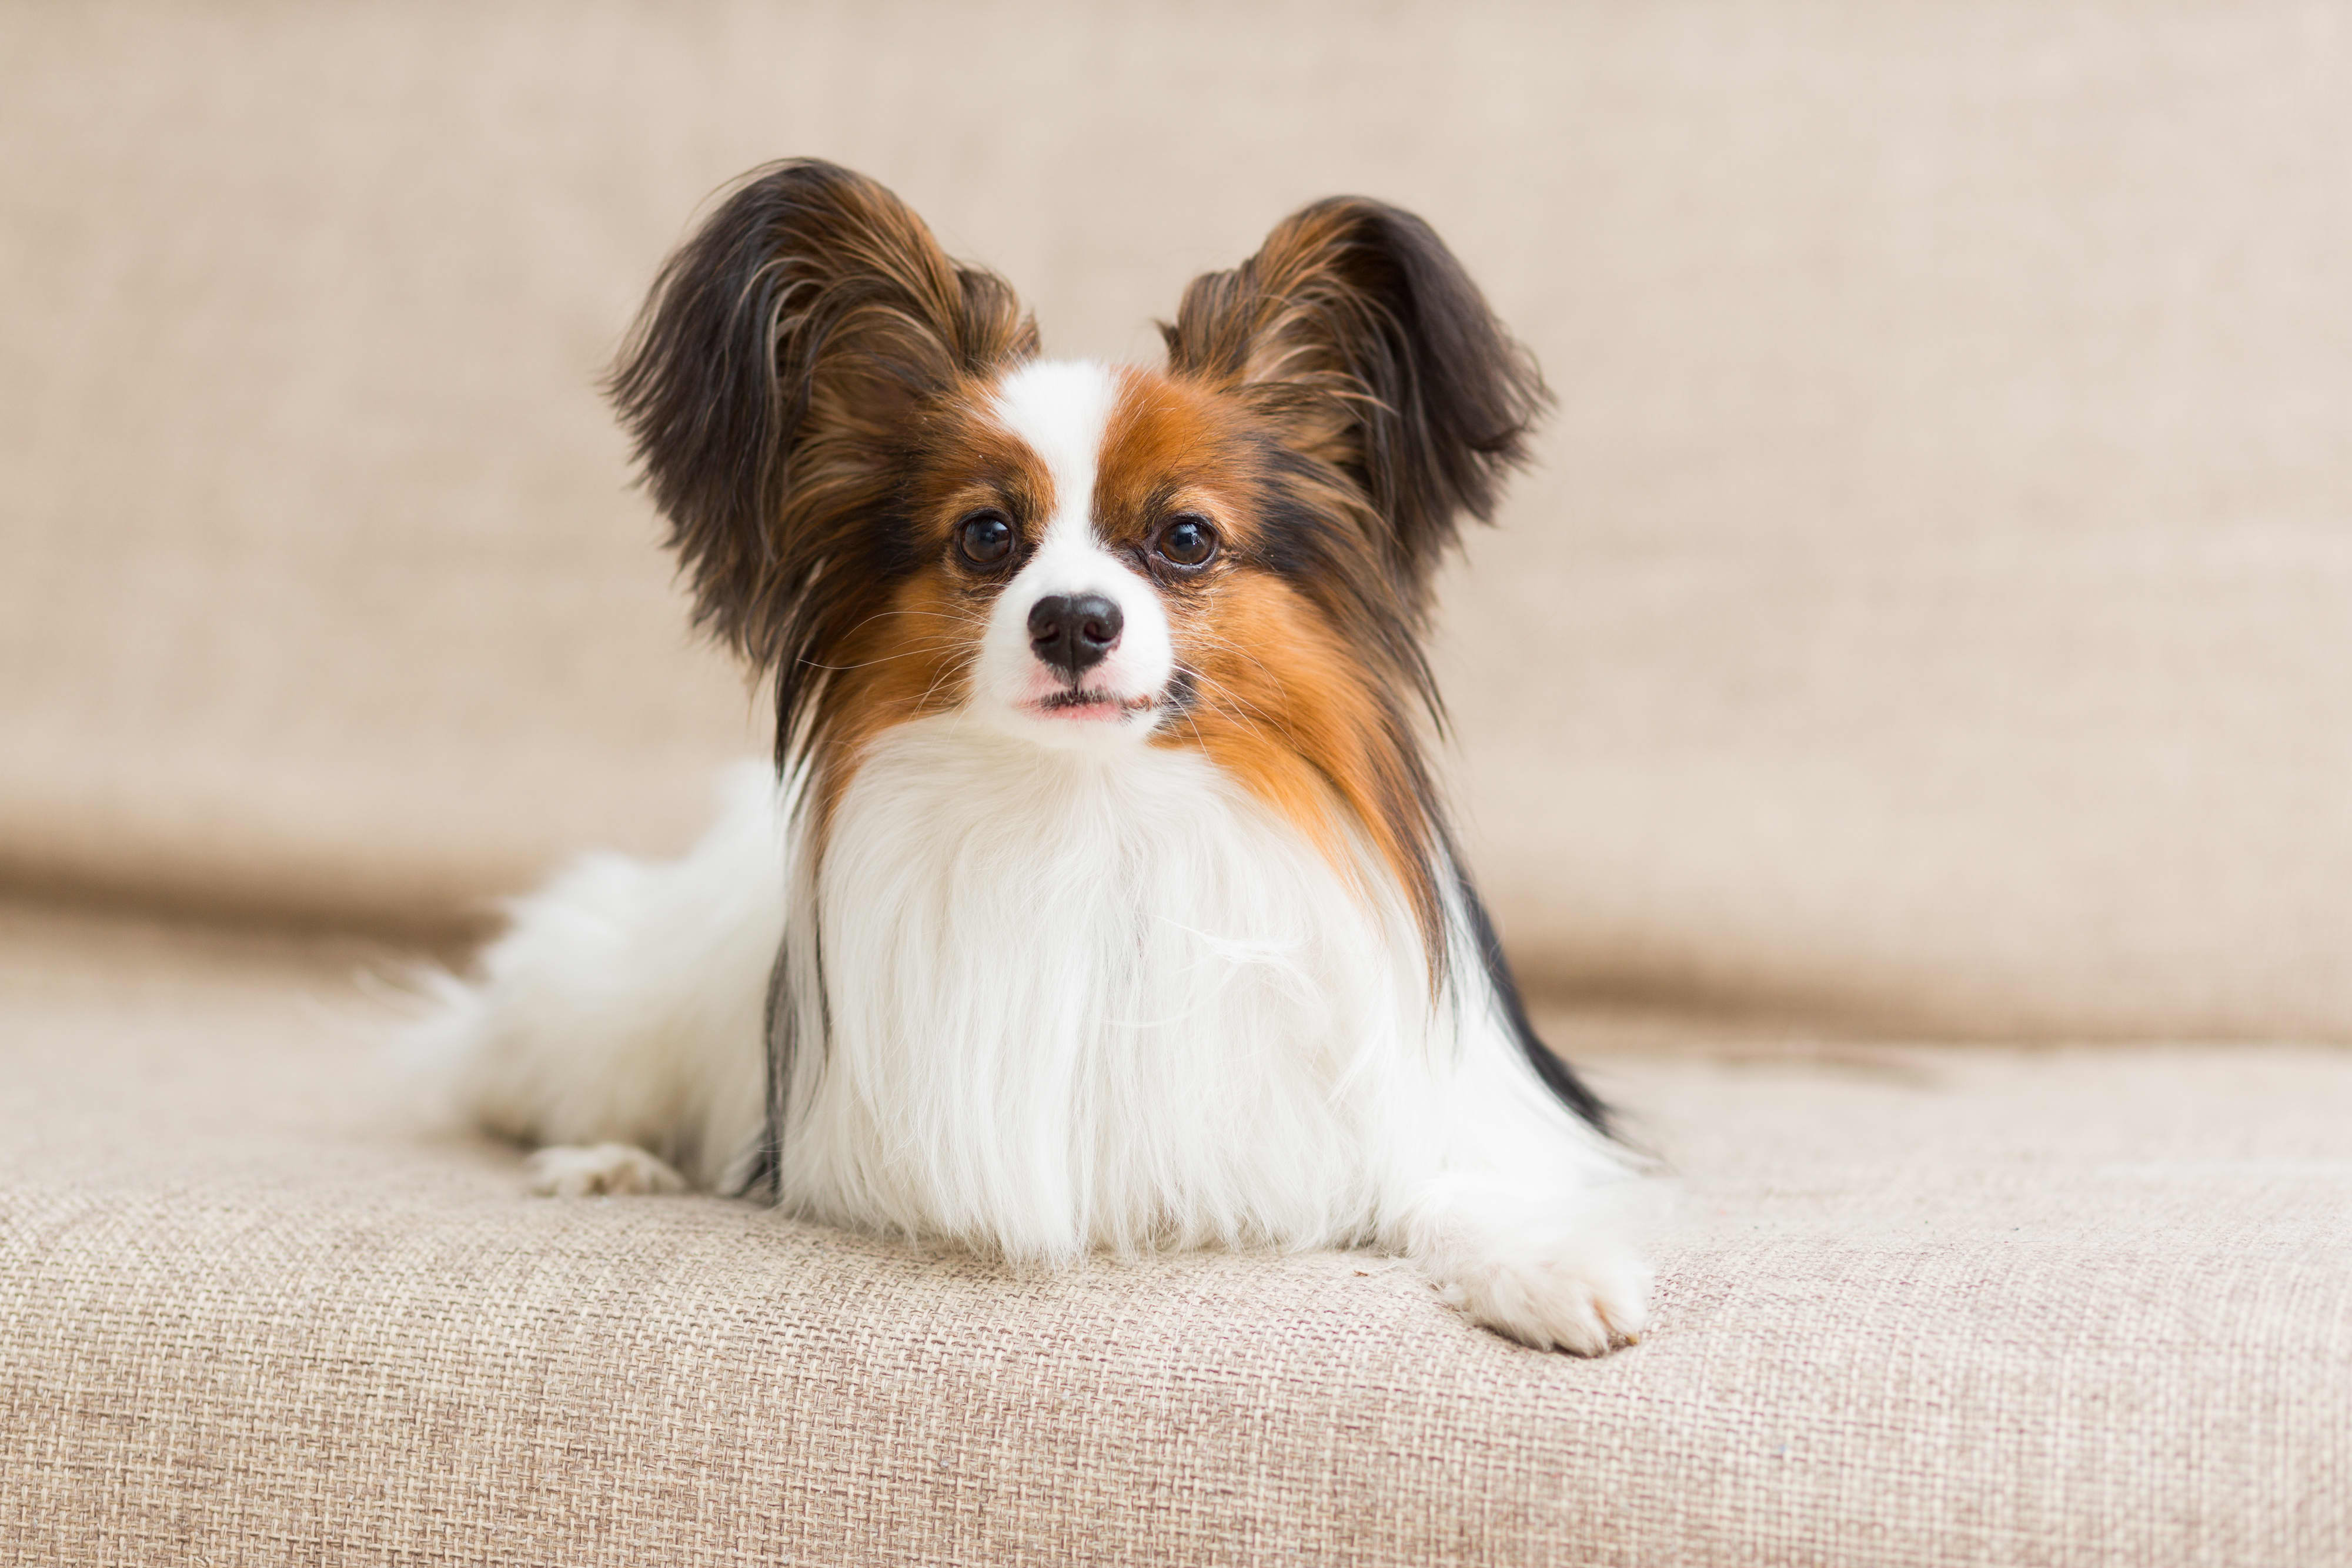 All About Miniature Dog Breeds: Are They Just a Smaller Version of the Big  Dogs?